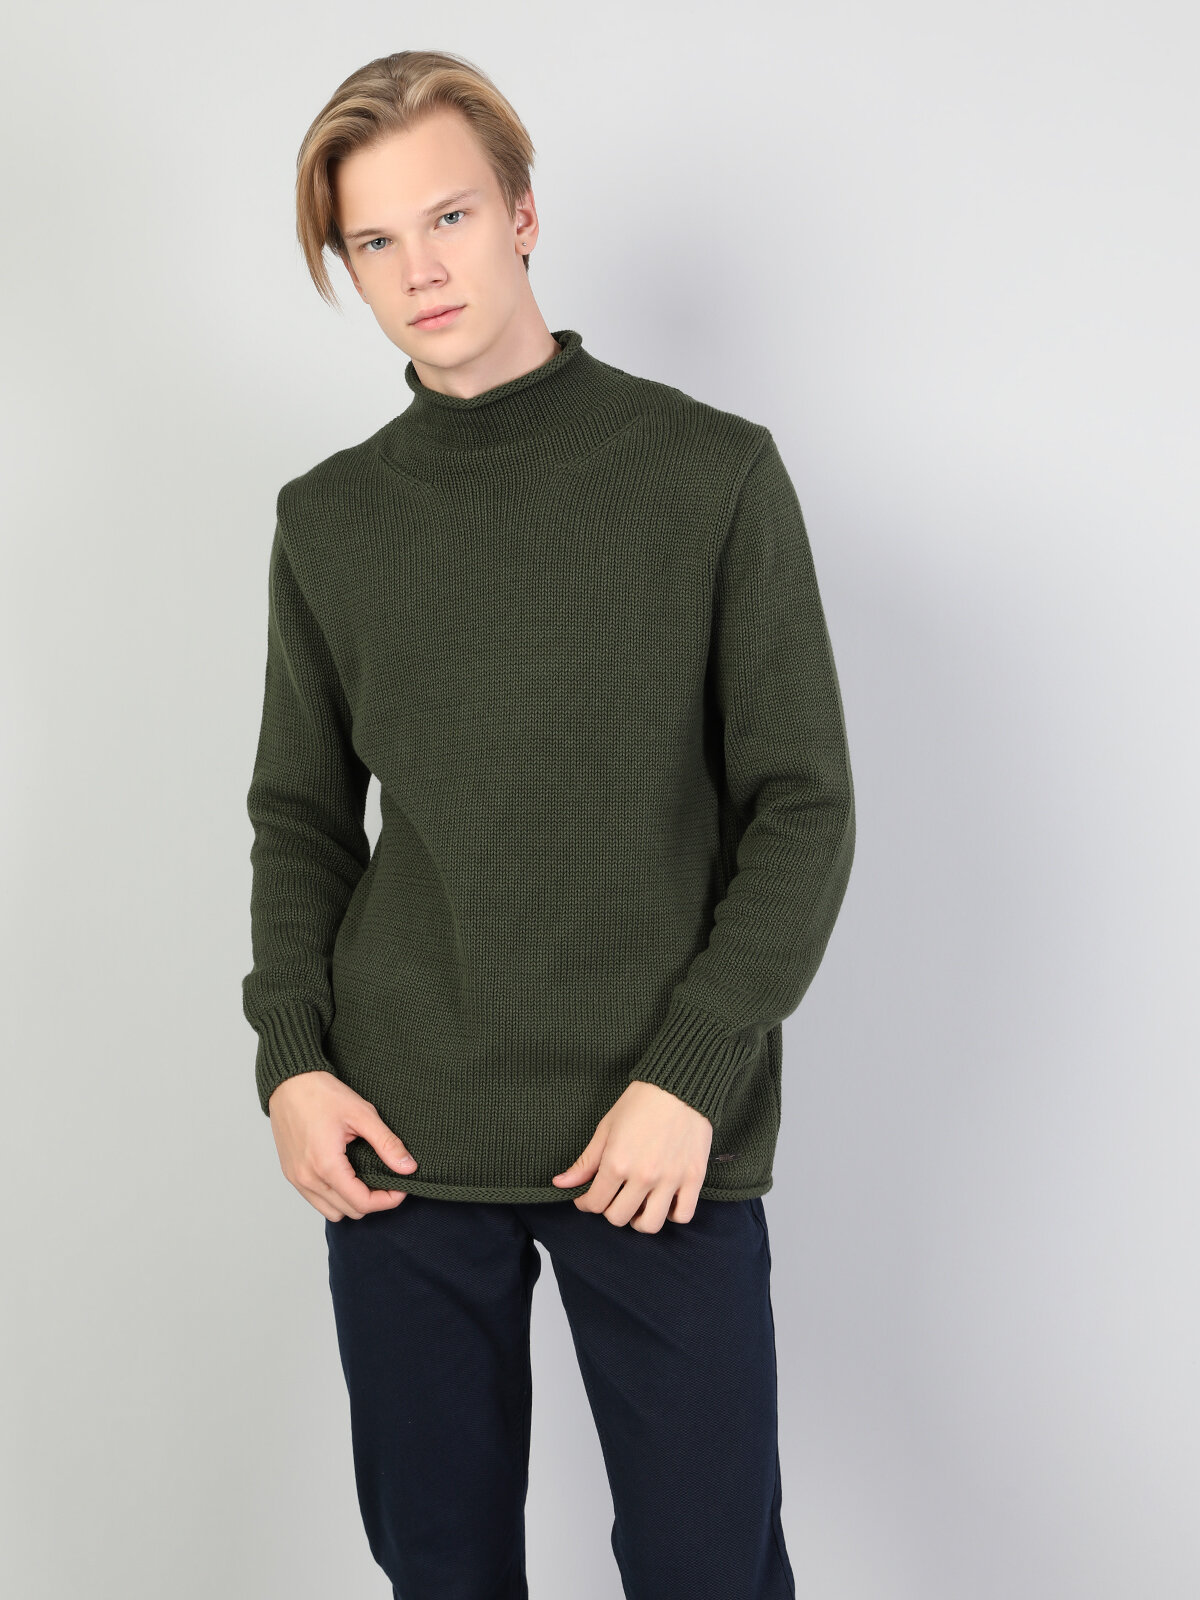 Colins Green Men Sweaters. 3